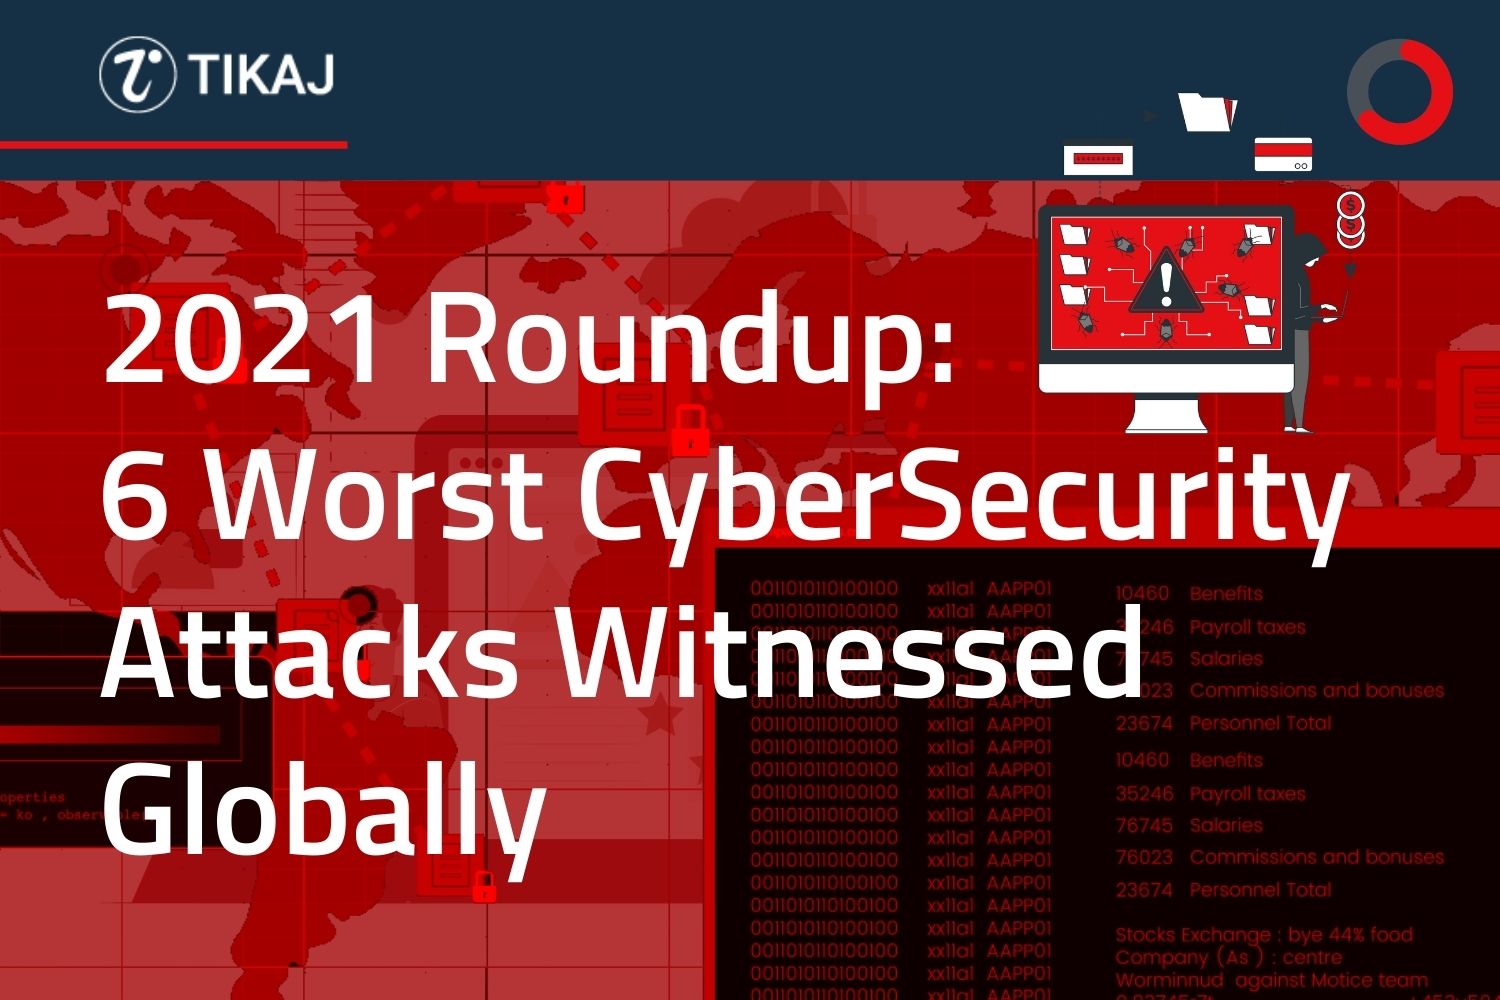 2021 Roundup: 6 Worst Cybersecurity Attacks Witnessed Globally